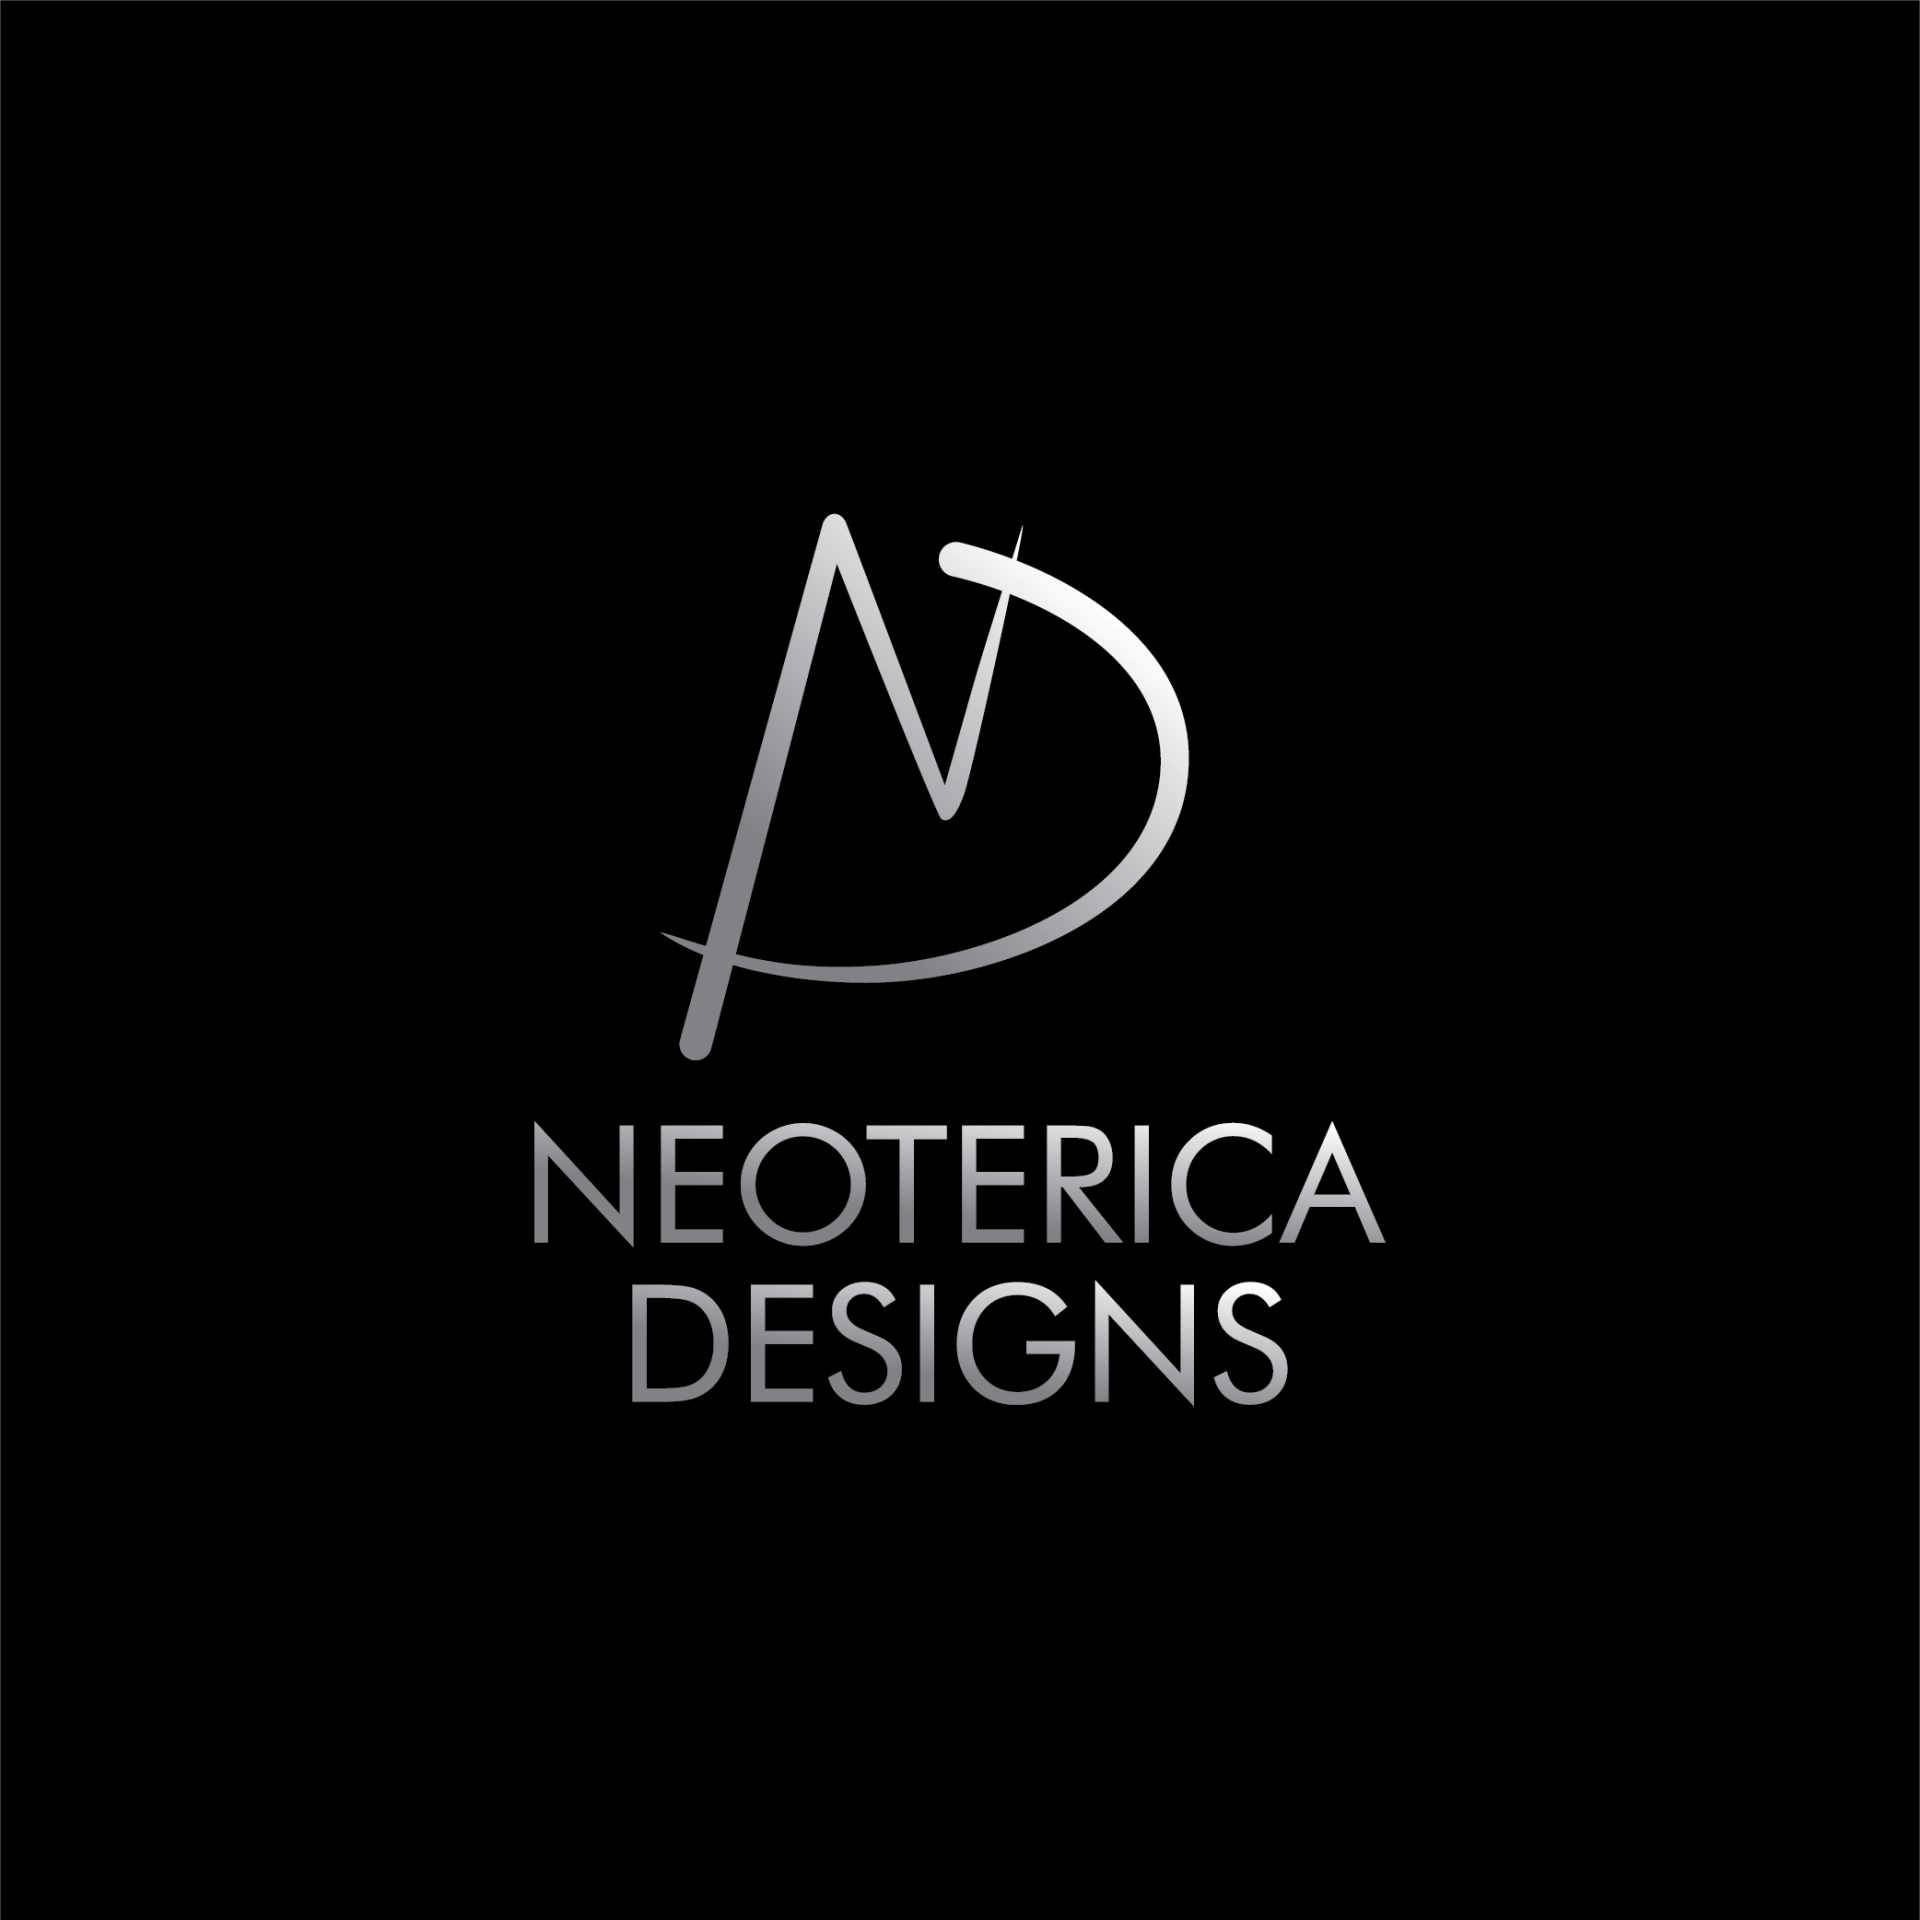 A logo for neoterica designs with a letter n on a black background.